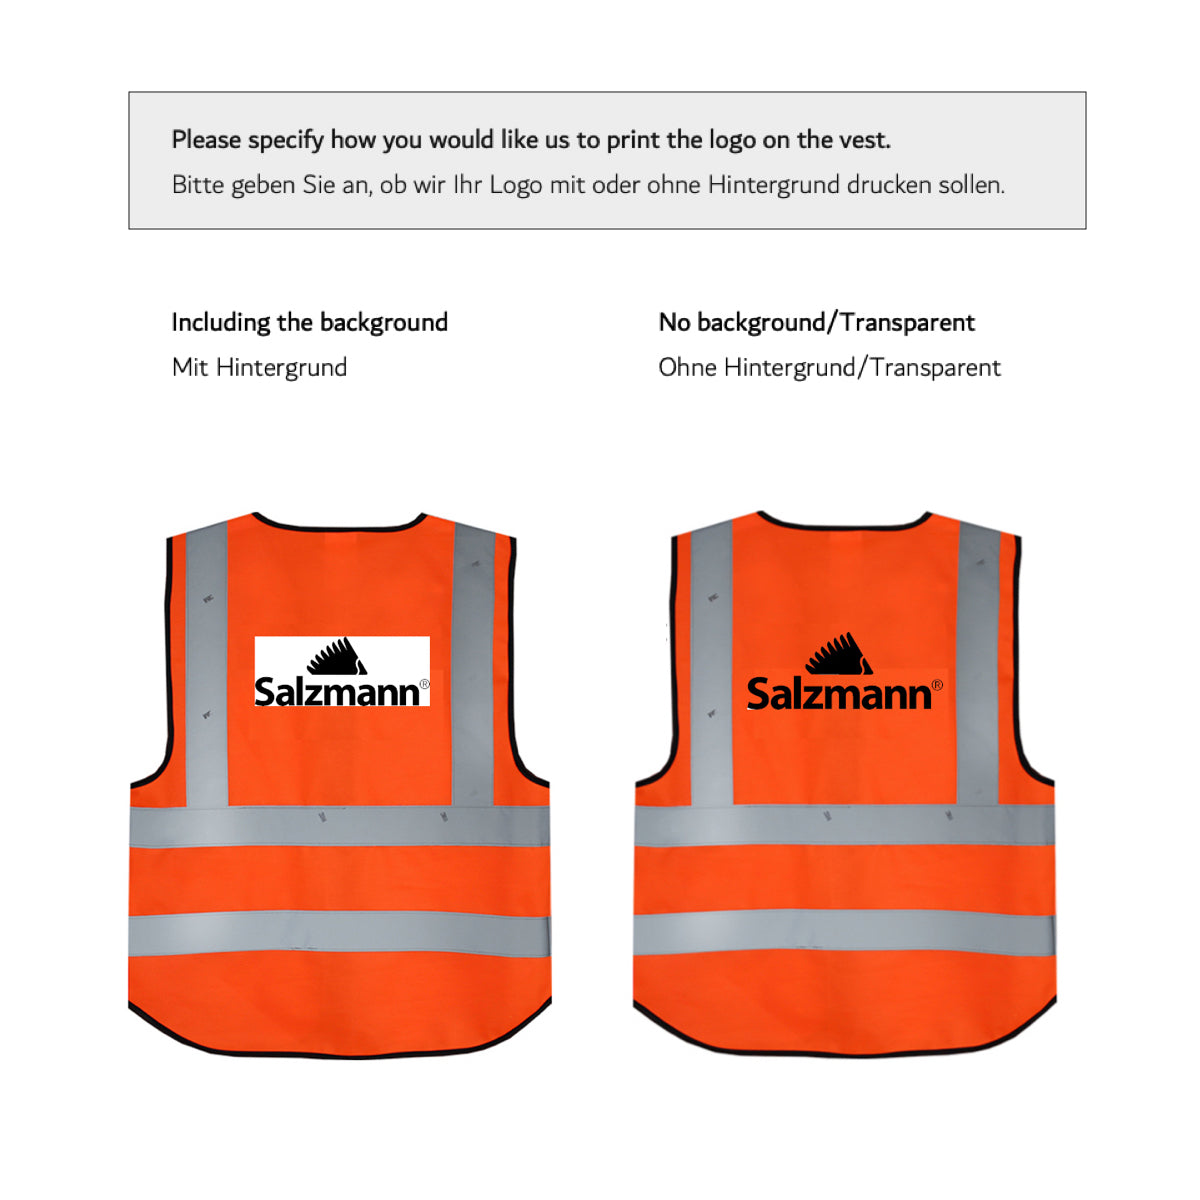 Text with explaination of logo print options and picture of back of safety vest with logo background and picture of back of safety vest without logo background. 